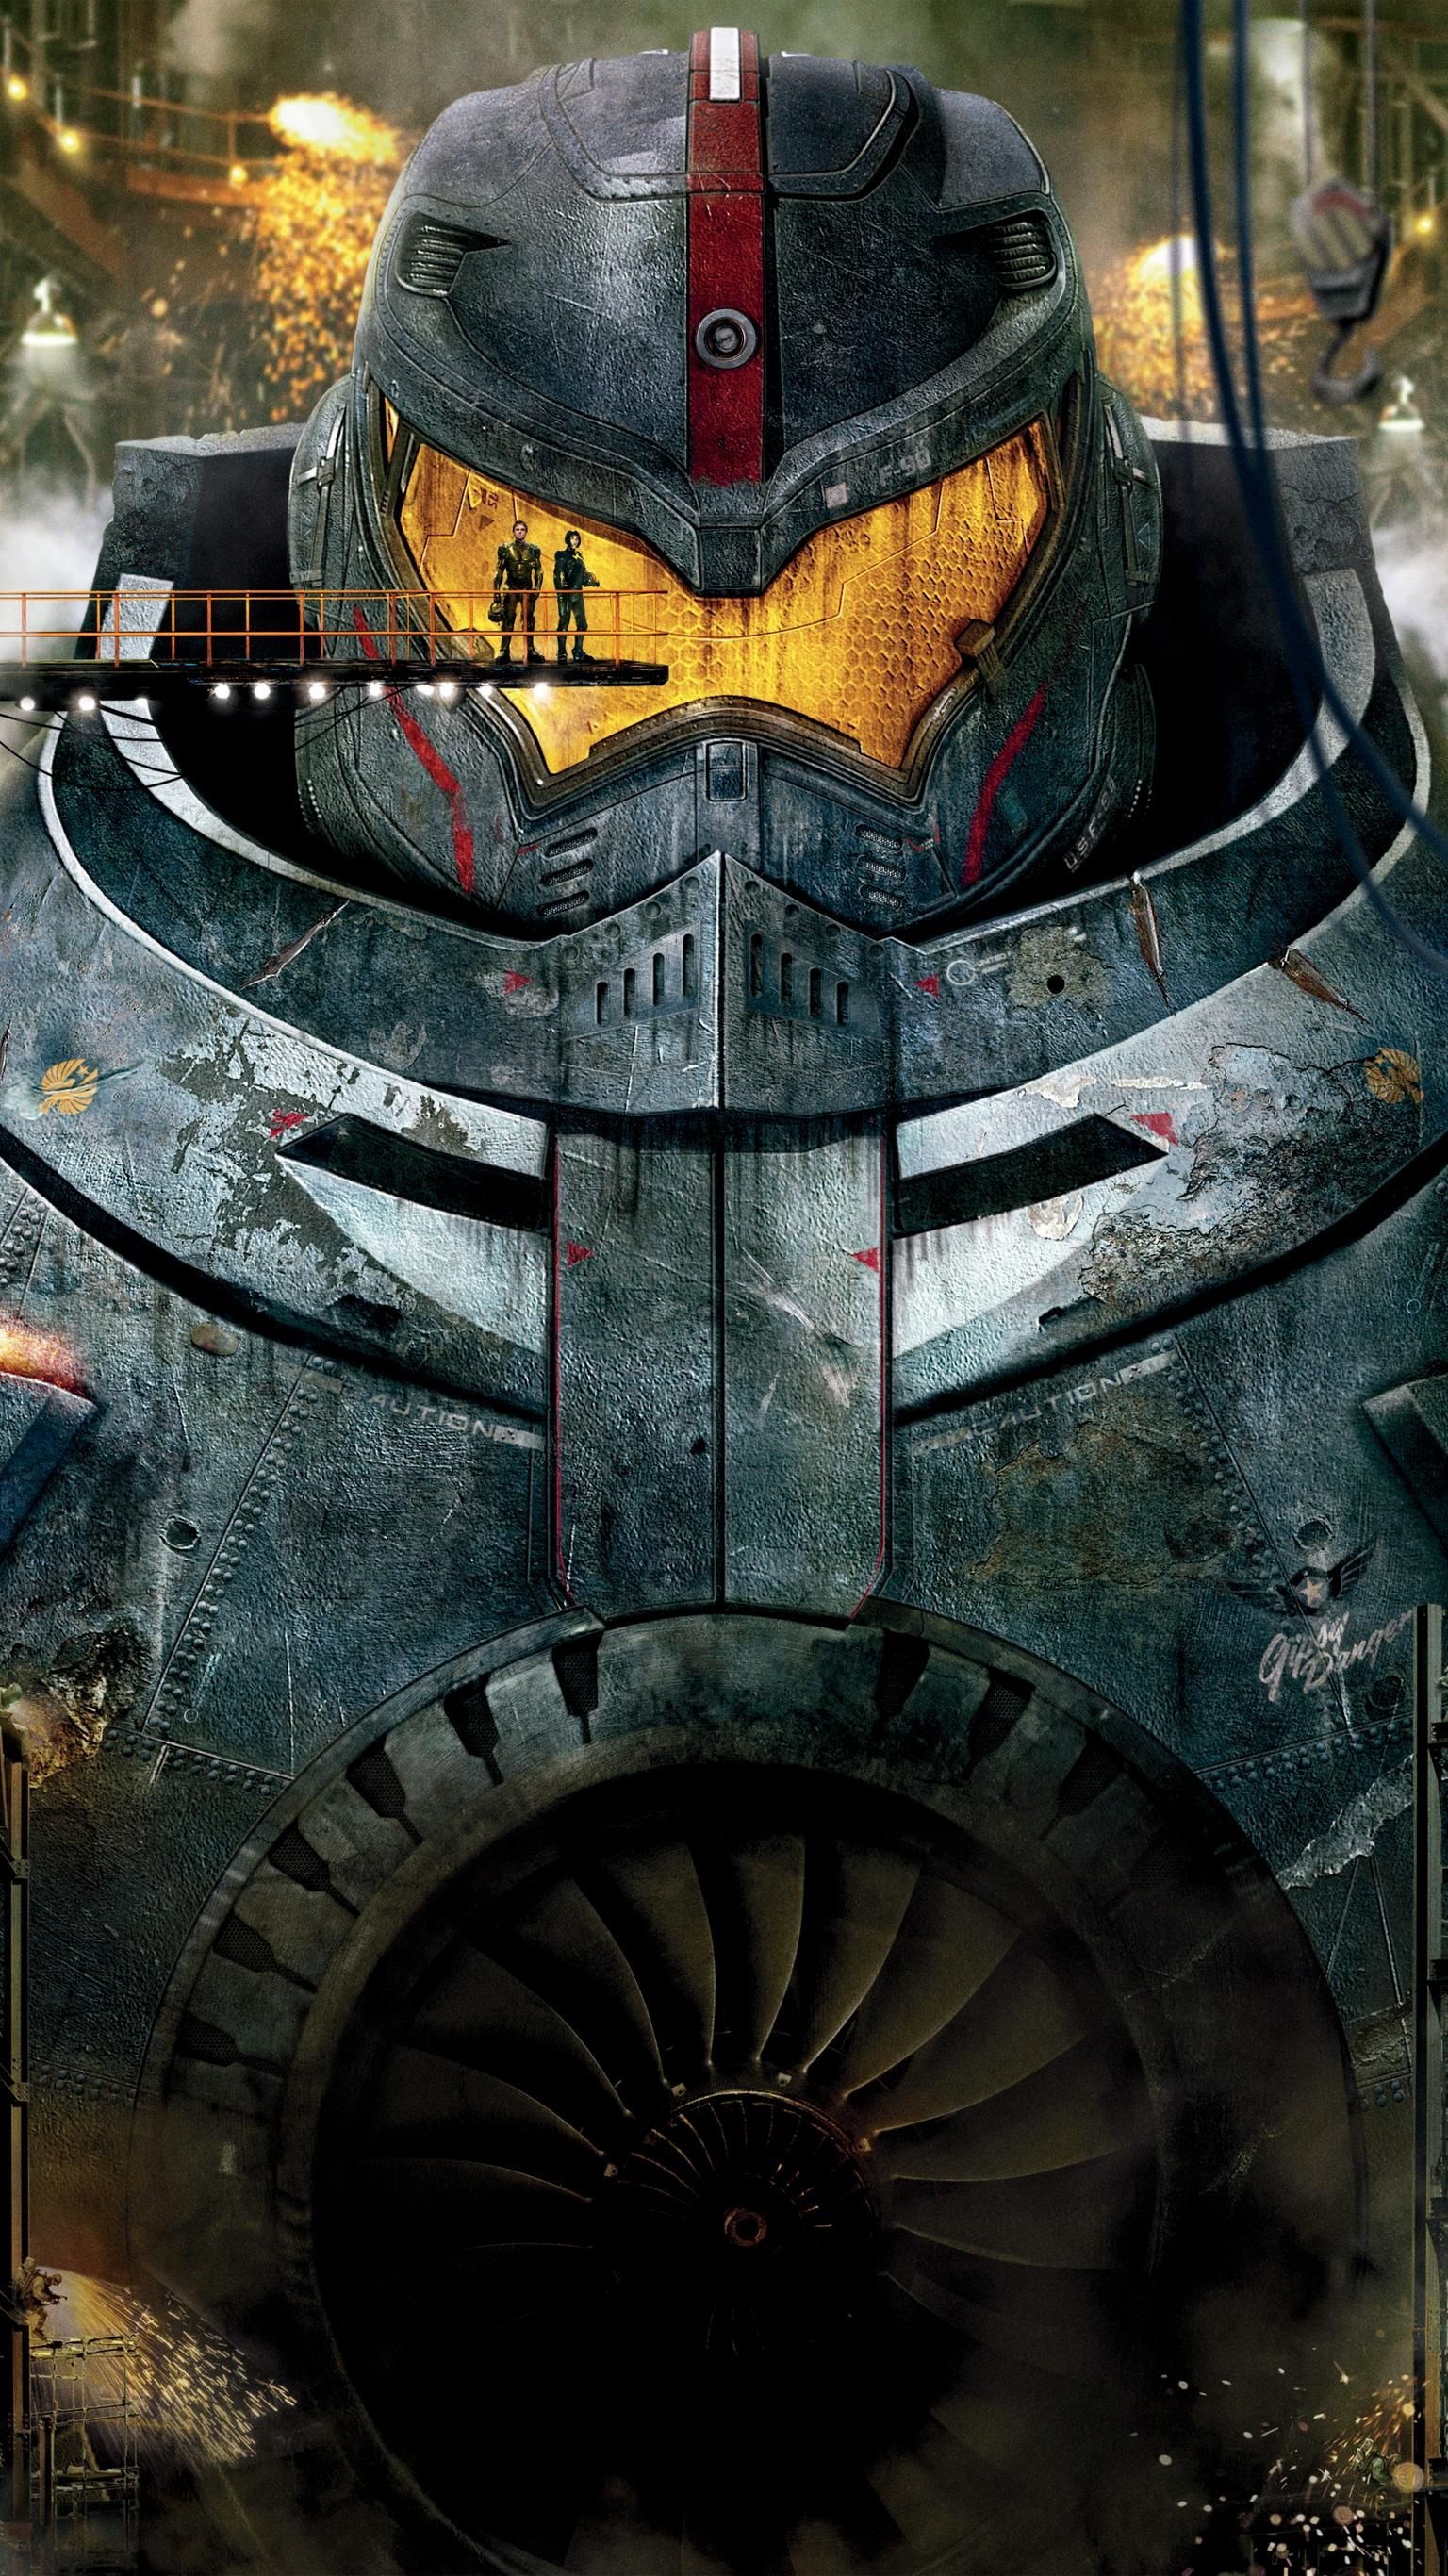 Pacific Rim, Textless movie wallpapers, High resolution, Epic sci-fi, 1540x2740 HD Phone